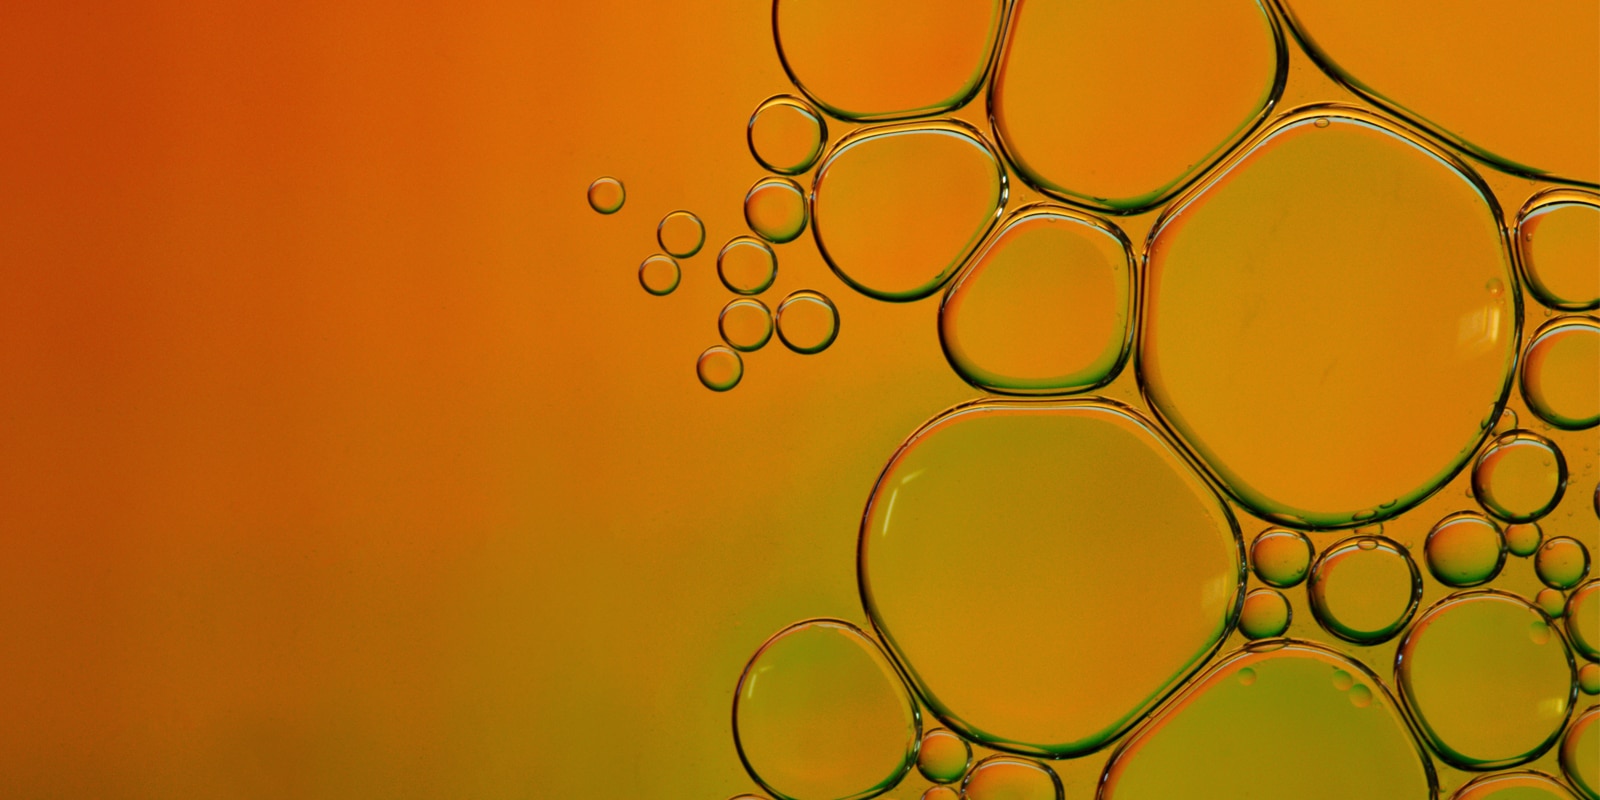 AQA A-Level Chemistry - An image of liquid bubbles